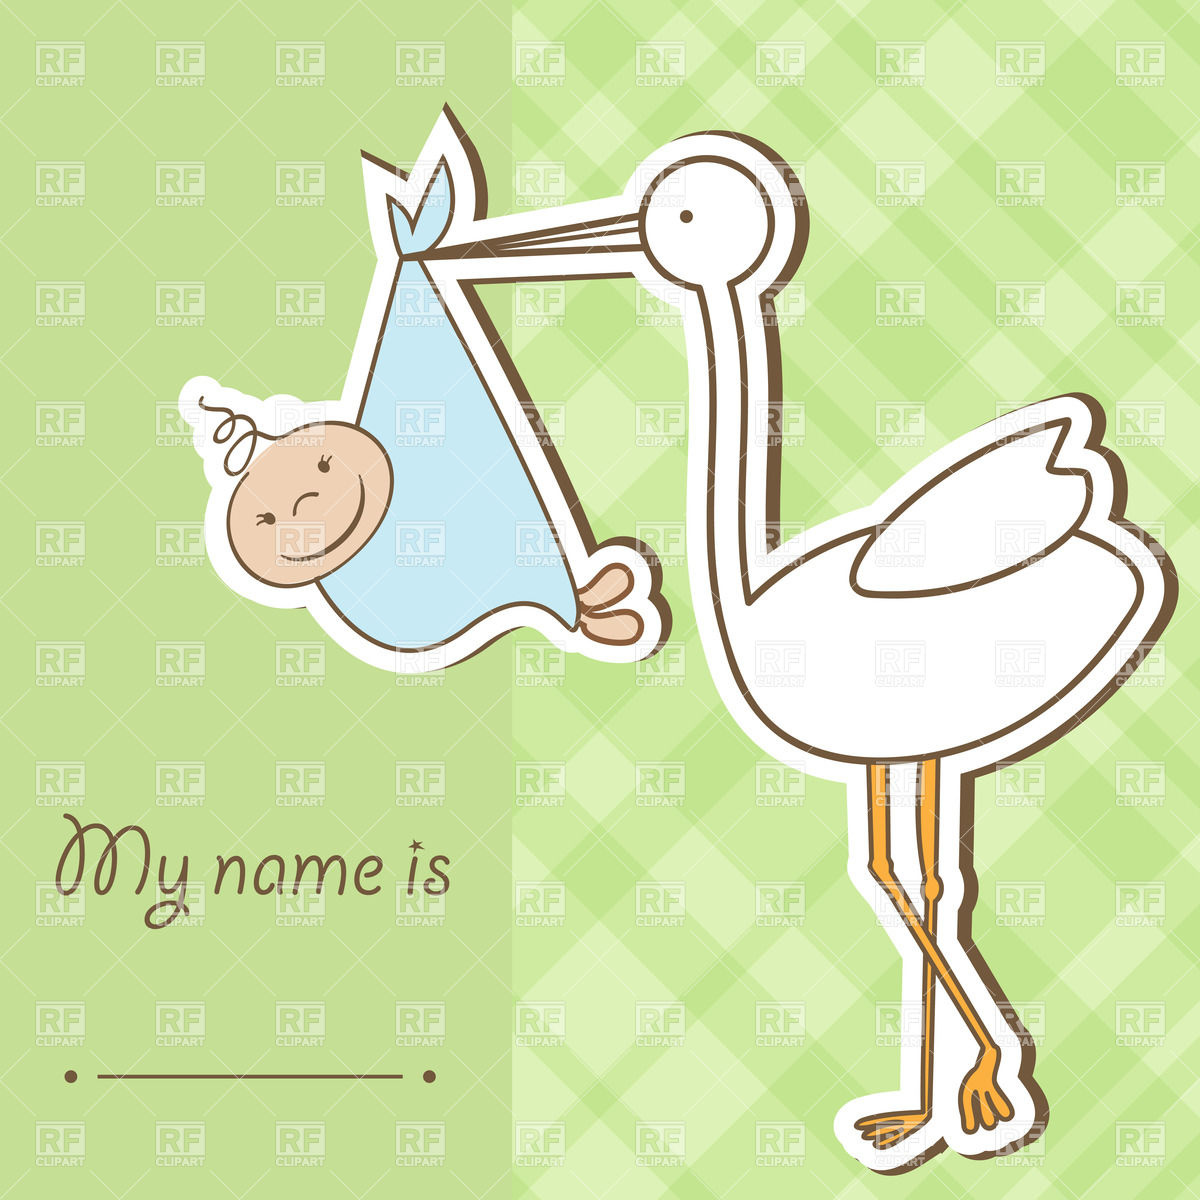 Baby Arrival Card With Stork Brings A Newborn 22163 Download Royalty